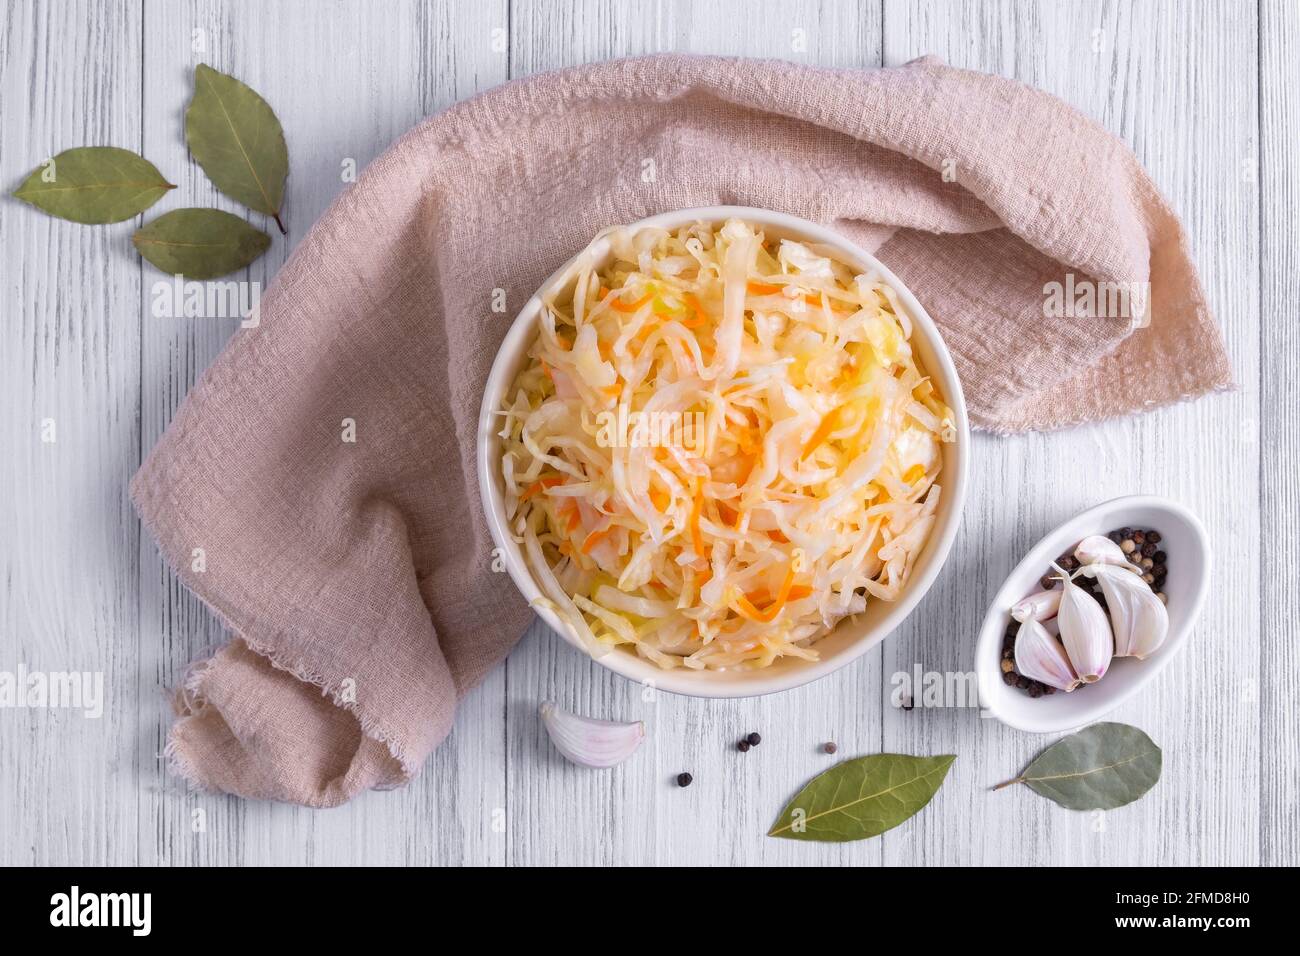 Ceramic bowl with fermented sauerkraut and spices Stock Photo